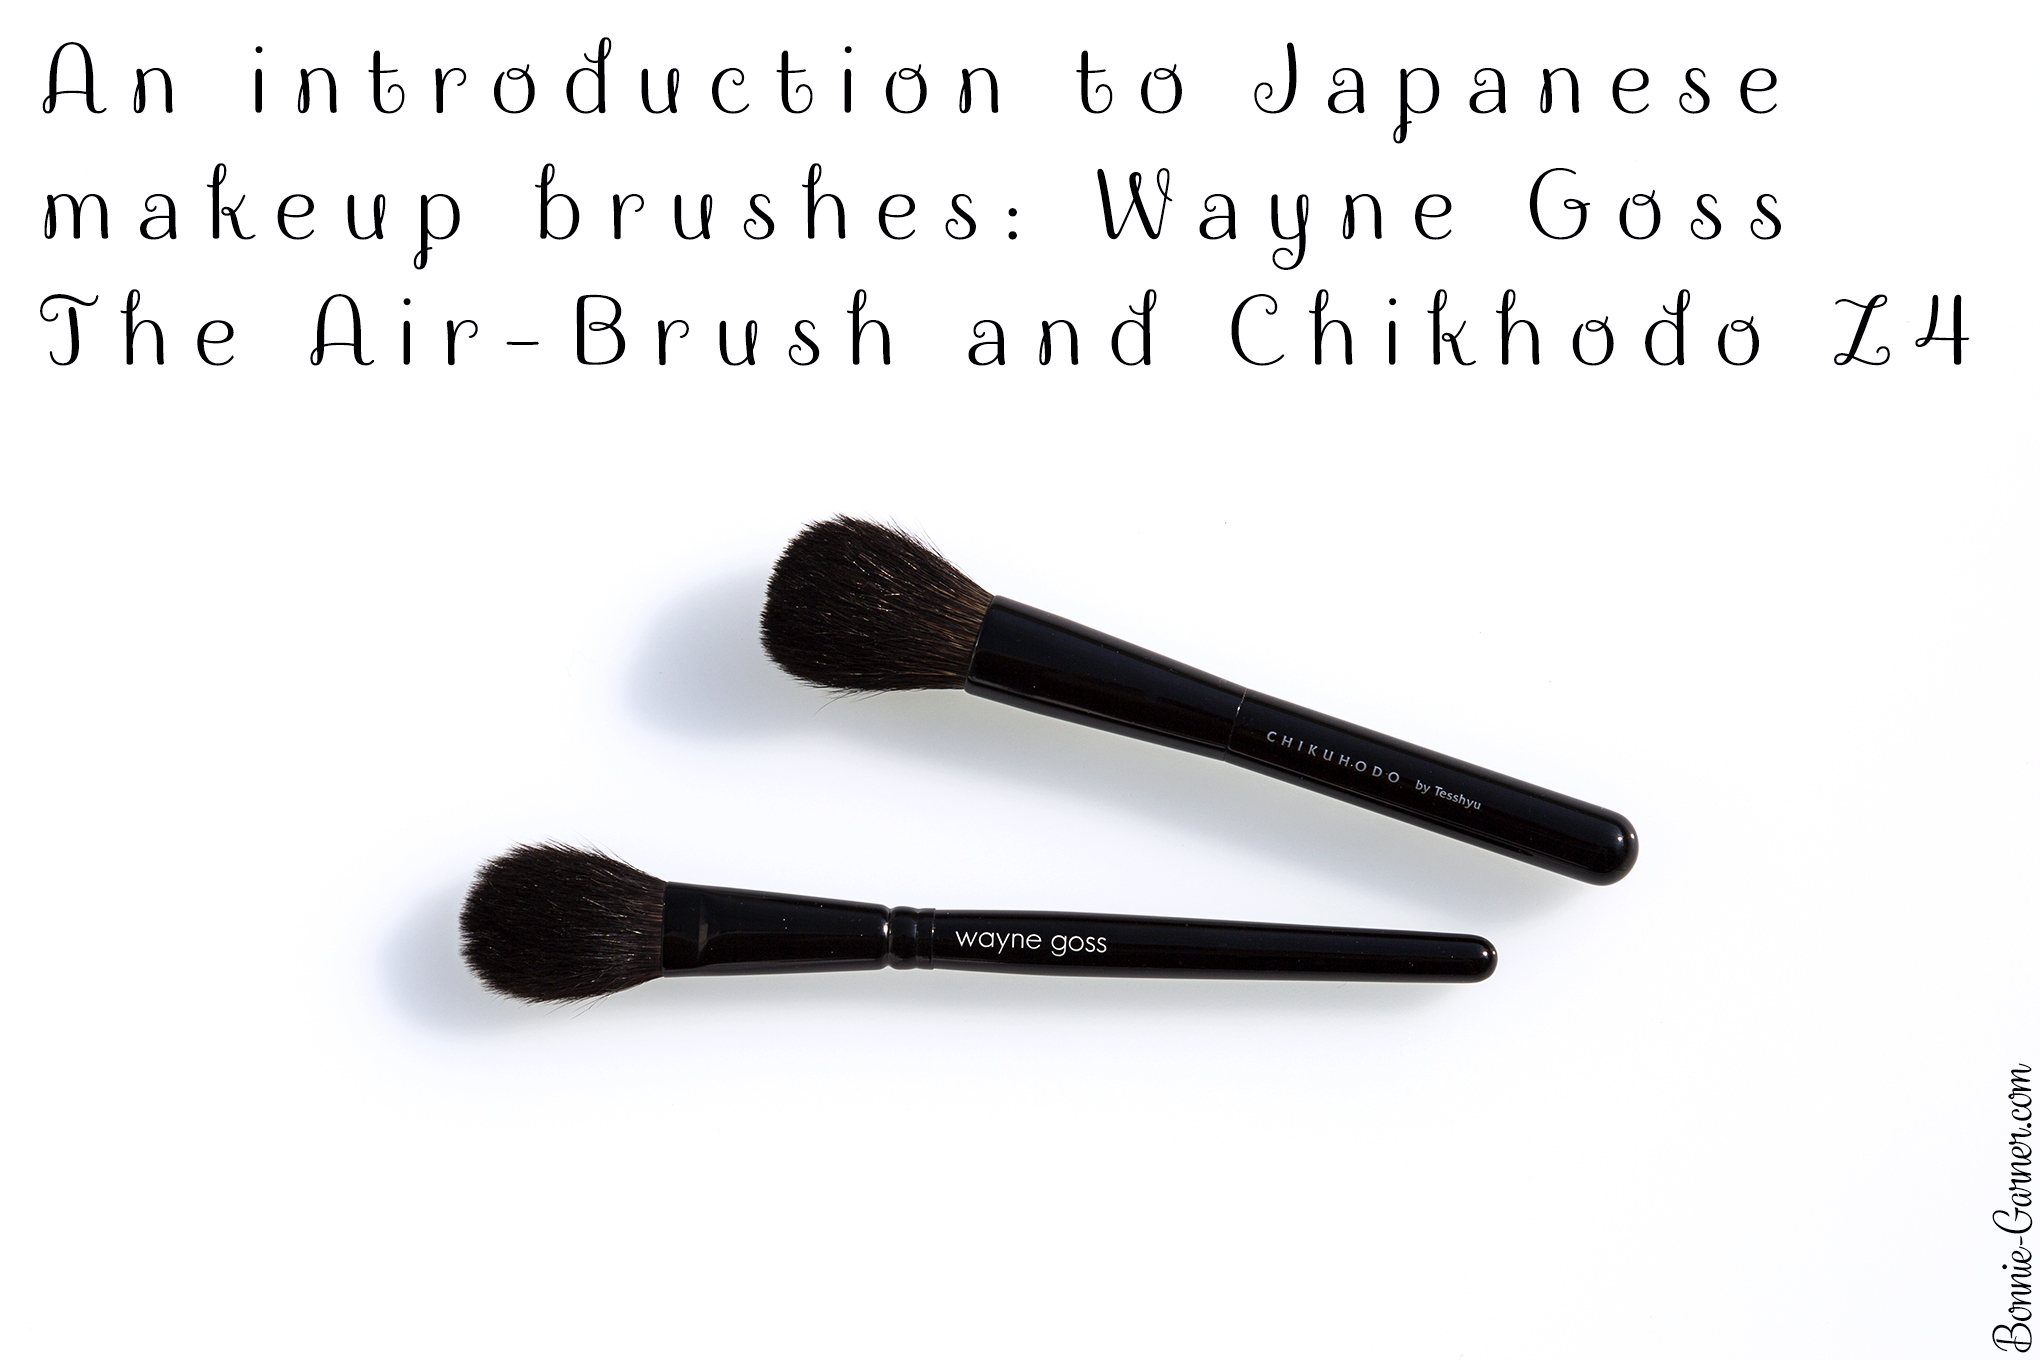 An introduction to Japanese makeup brushes: Wayne Goss The Air-Brush and Chikuhodo Z4